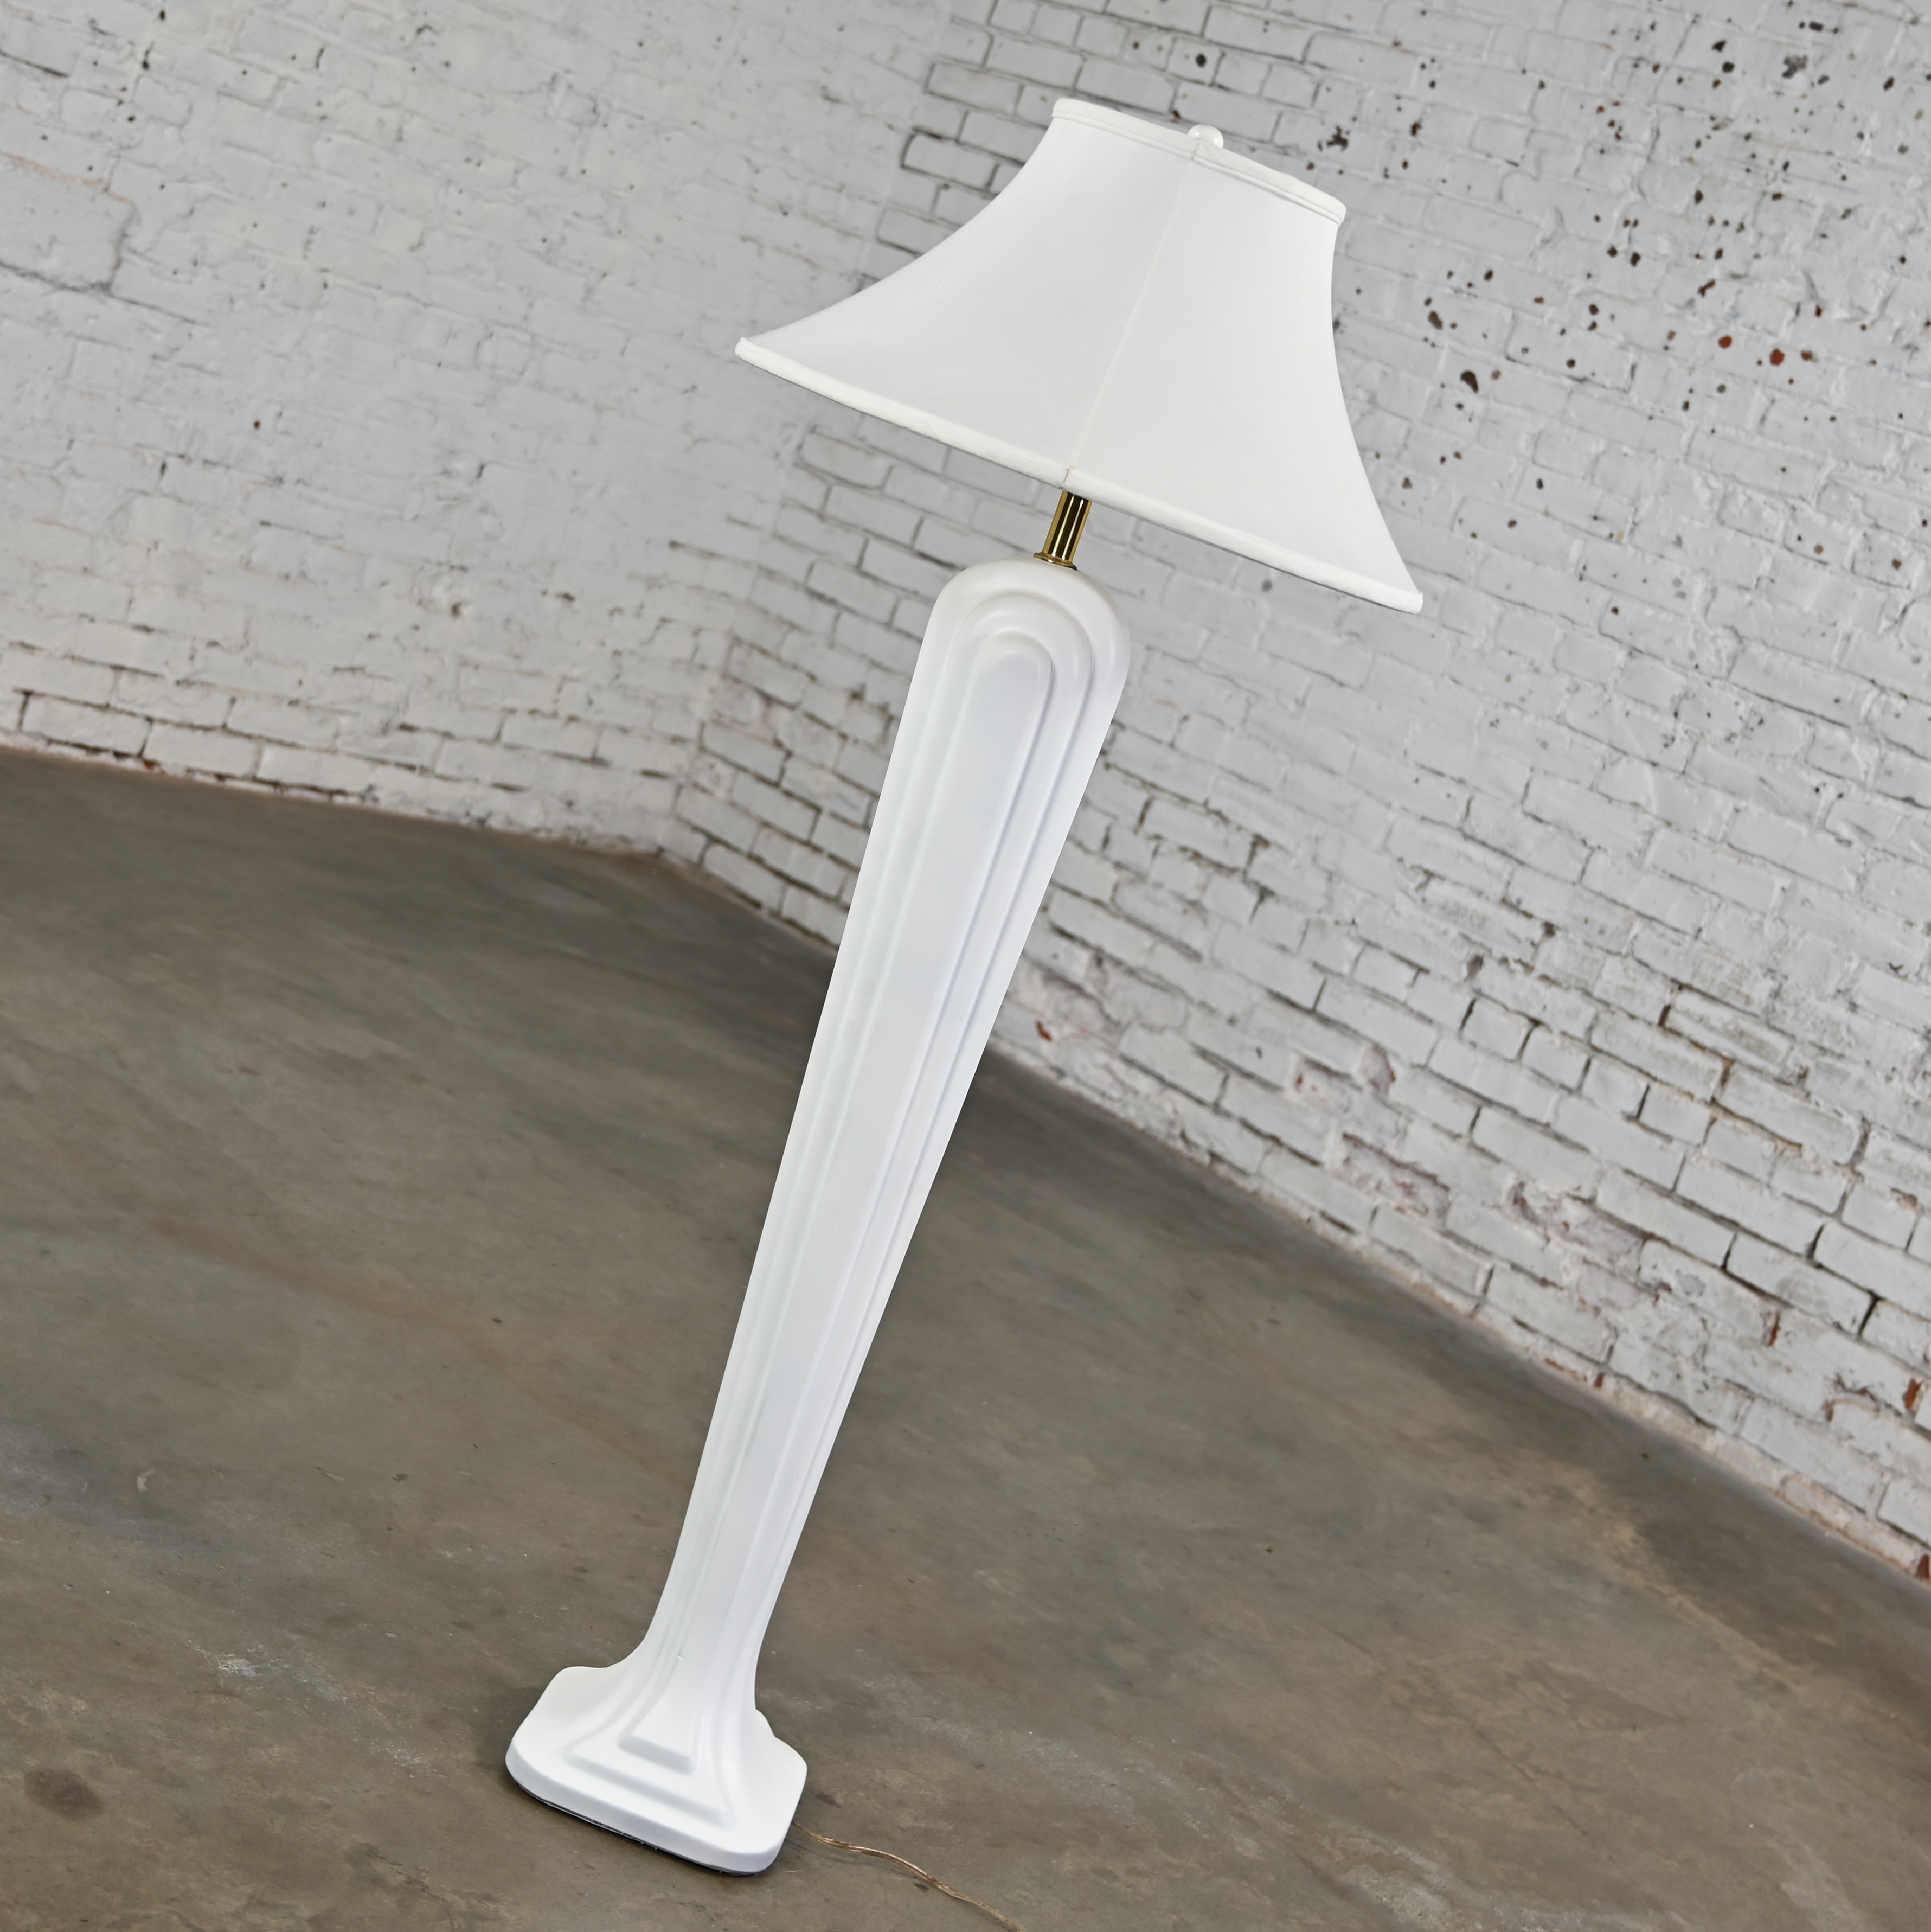 1980’s Art Deco Revival to Postmodern Paolo Gucci Floor Lamp Sculpted Resin & Original Bell Shade